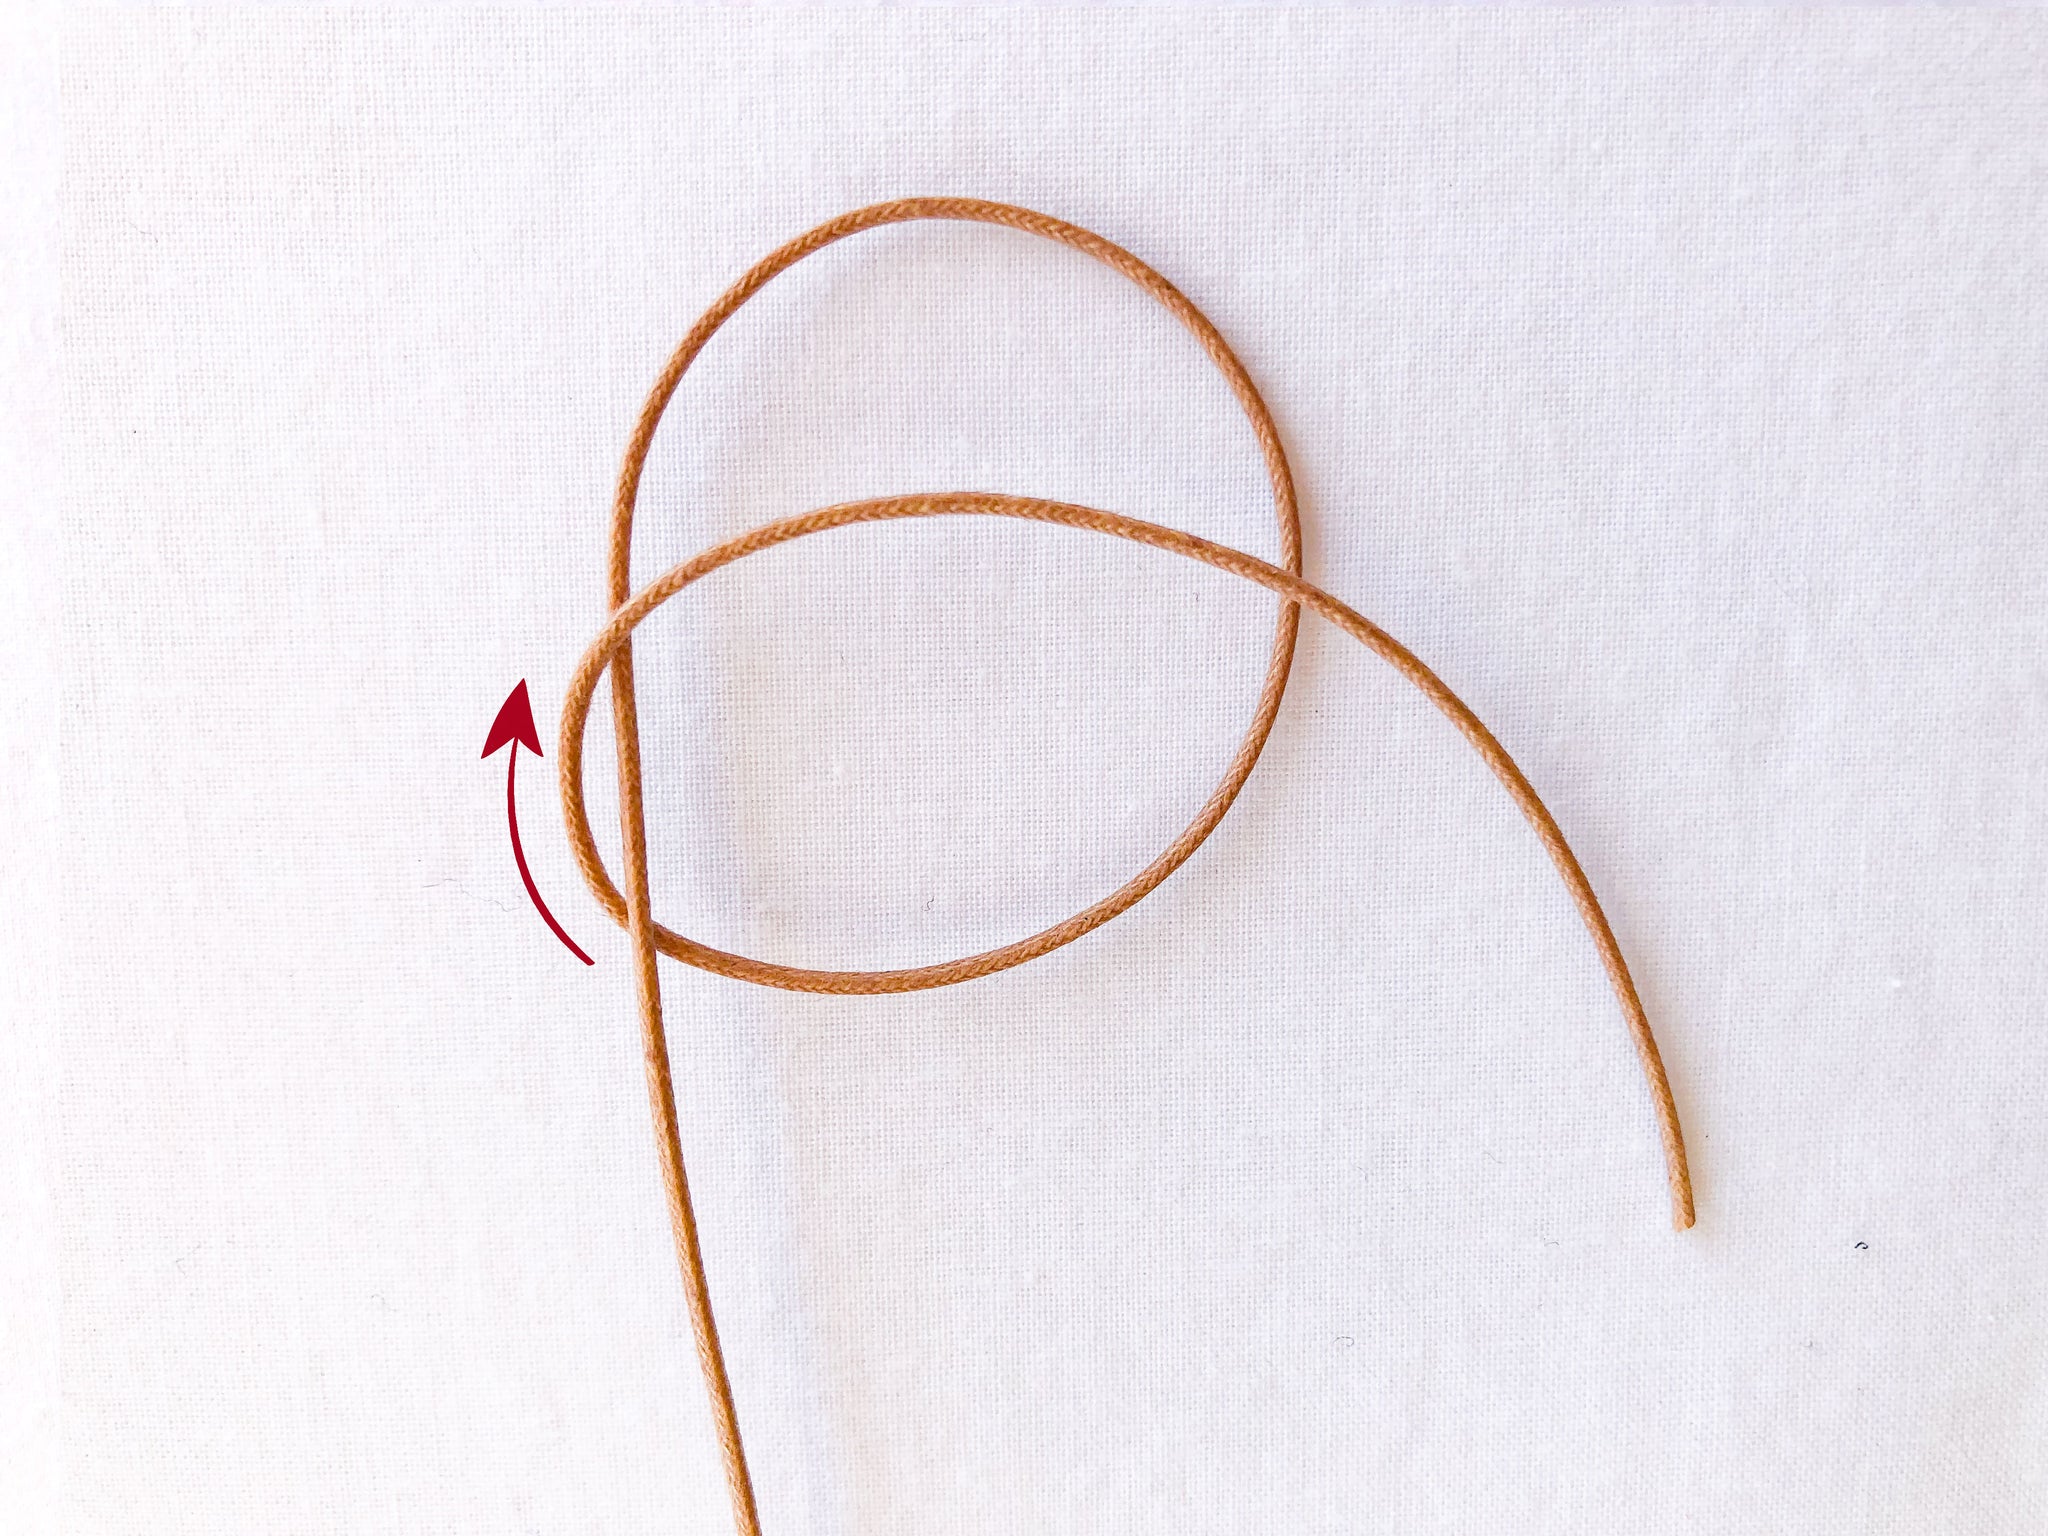 How to tie a slip knot, step 2